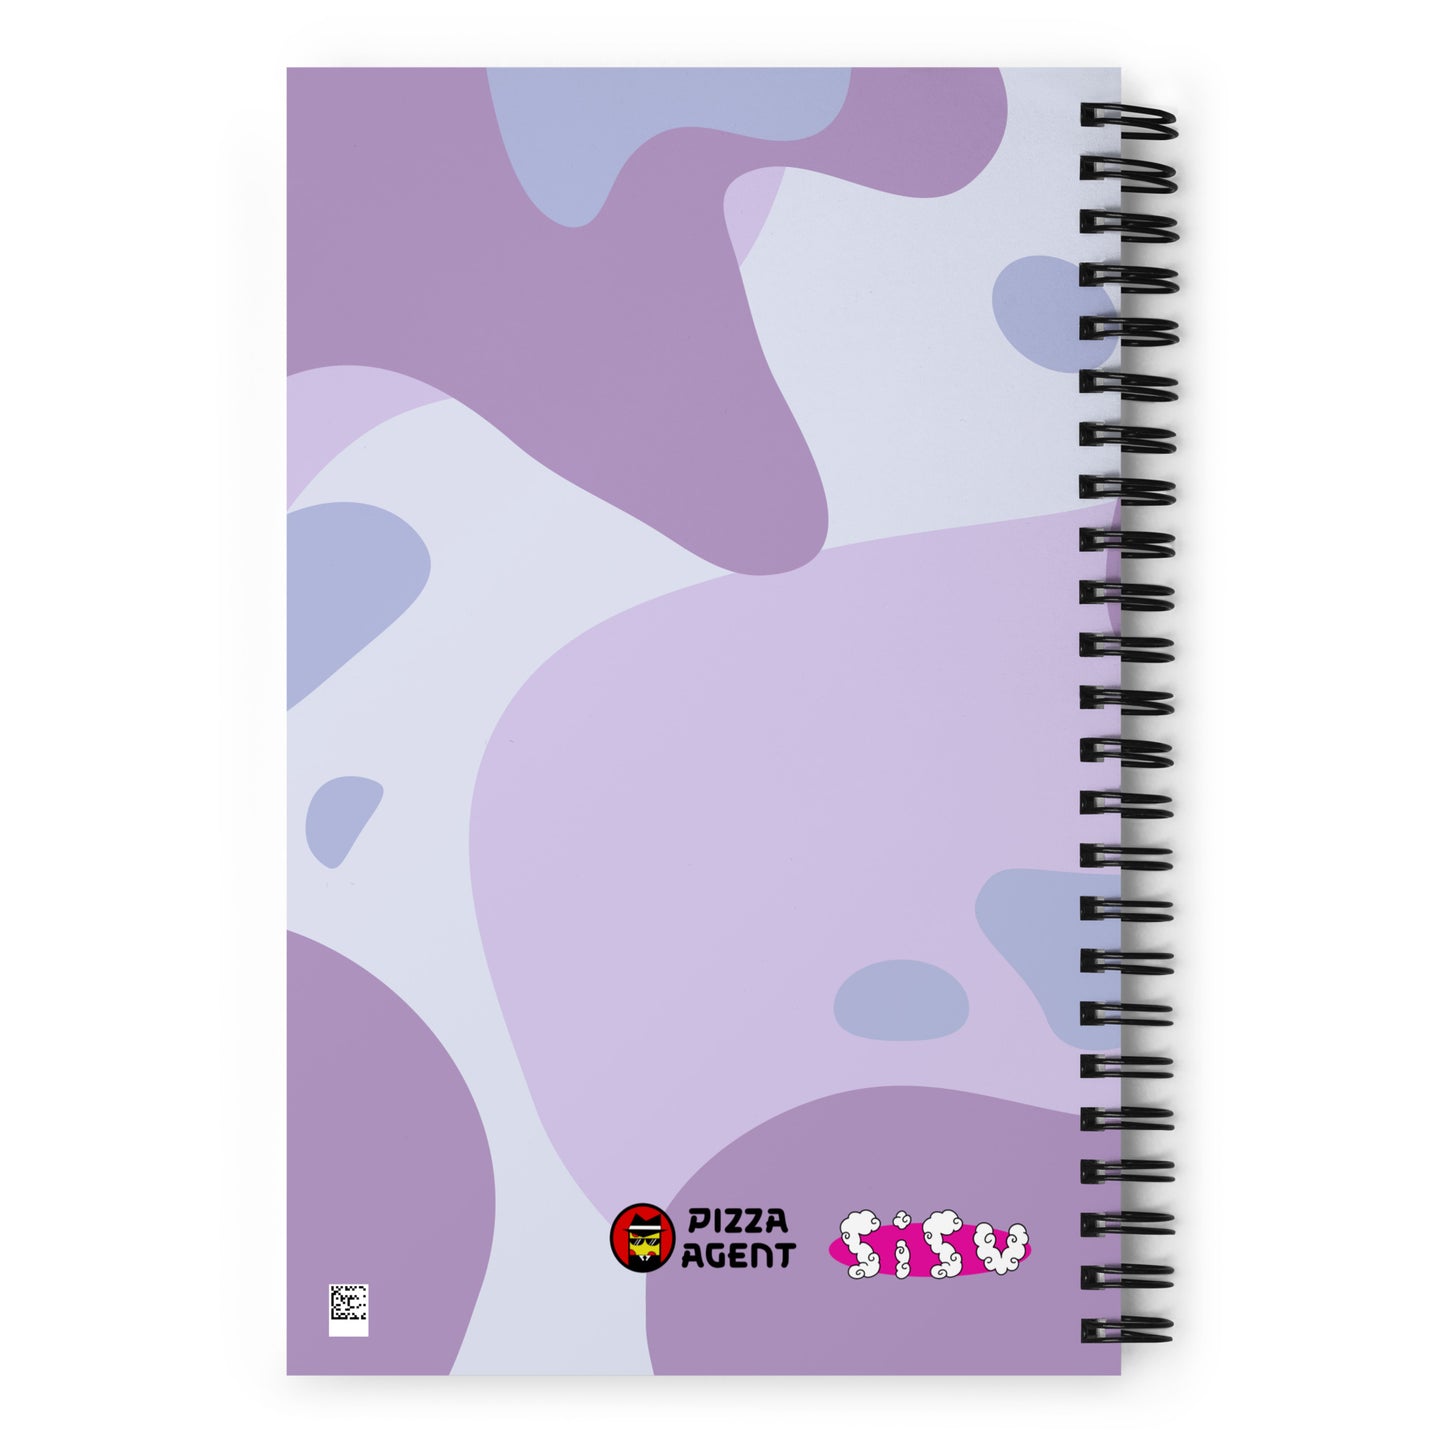 Mime Girl Spiral notebook| Anime mime girl notebook |